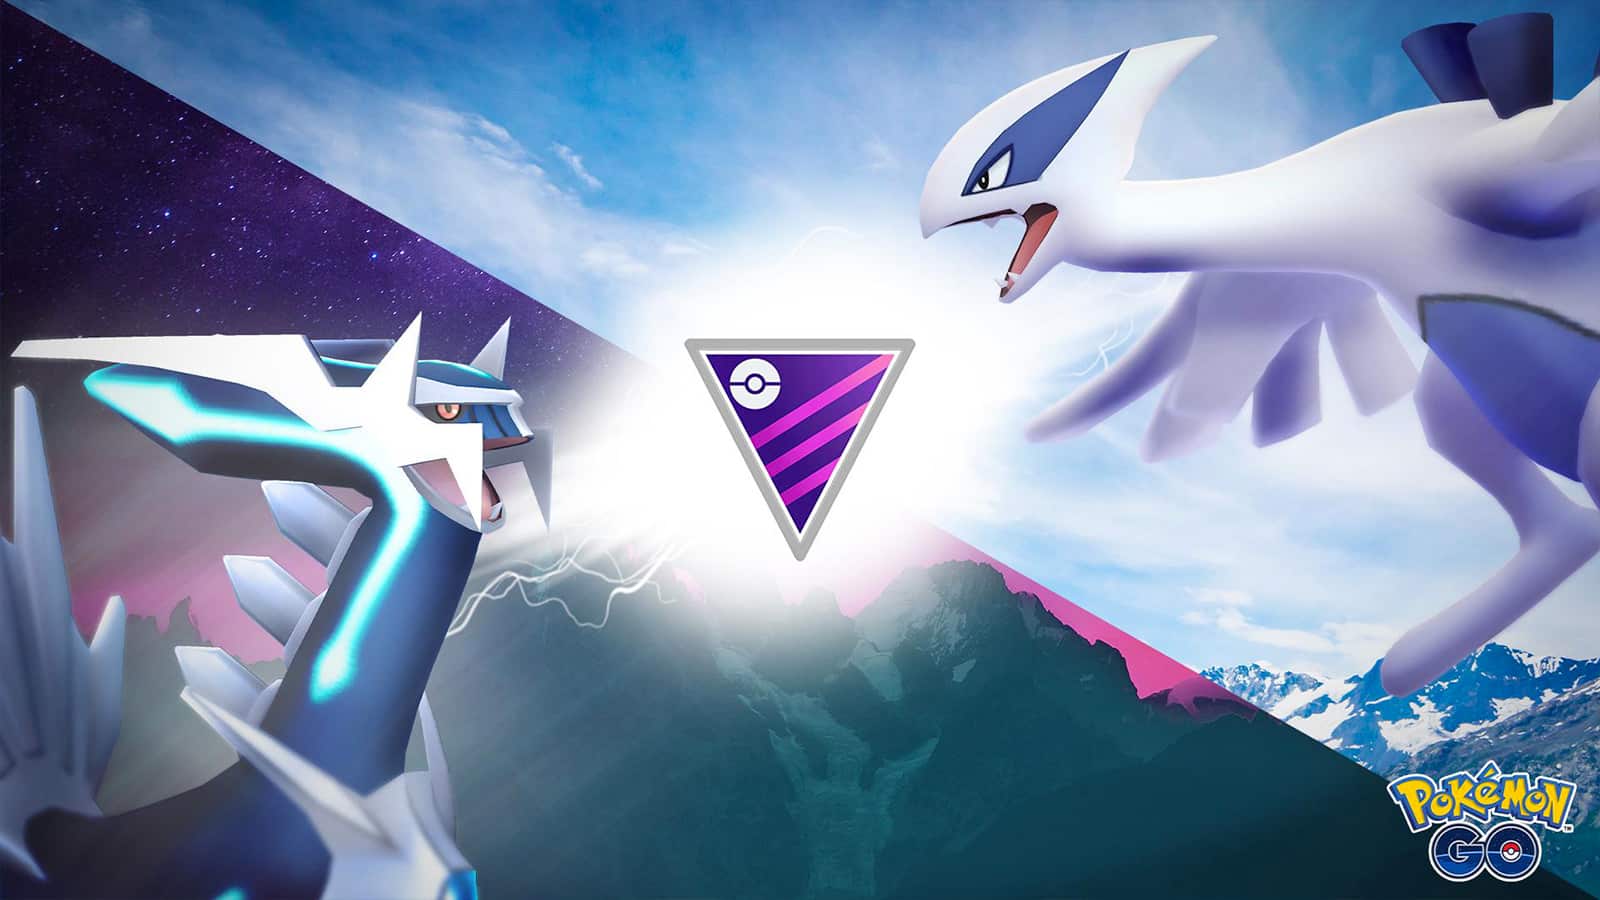 Dialga and Lugia appearing in the best Master League team in Pokemon Go